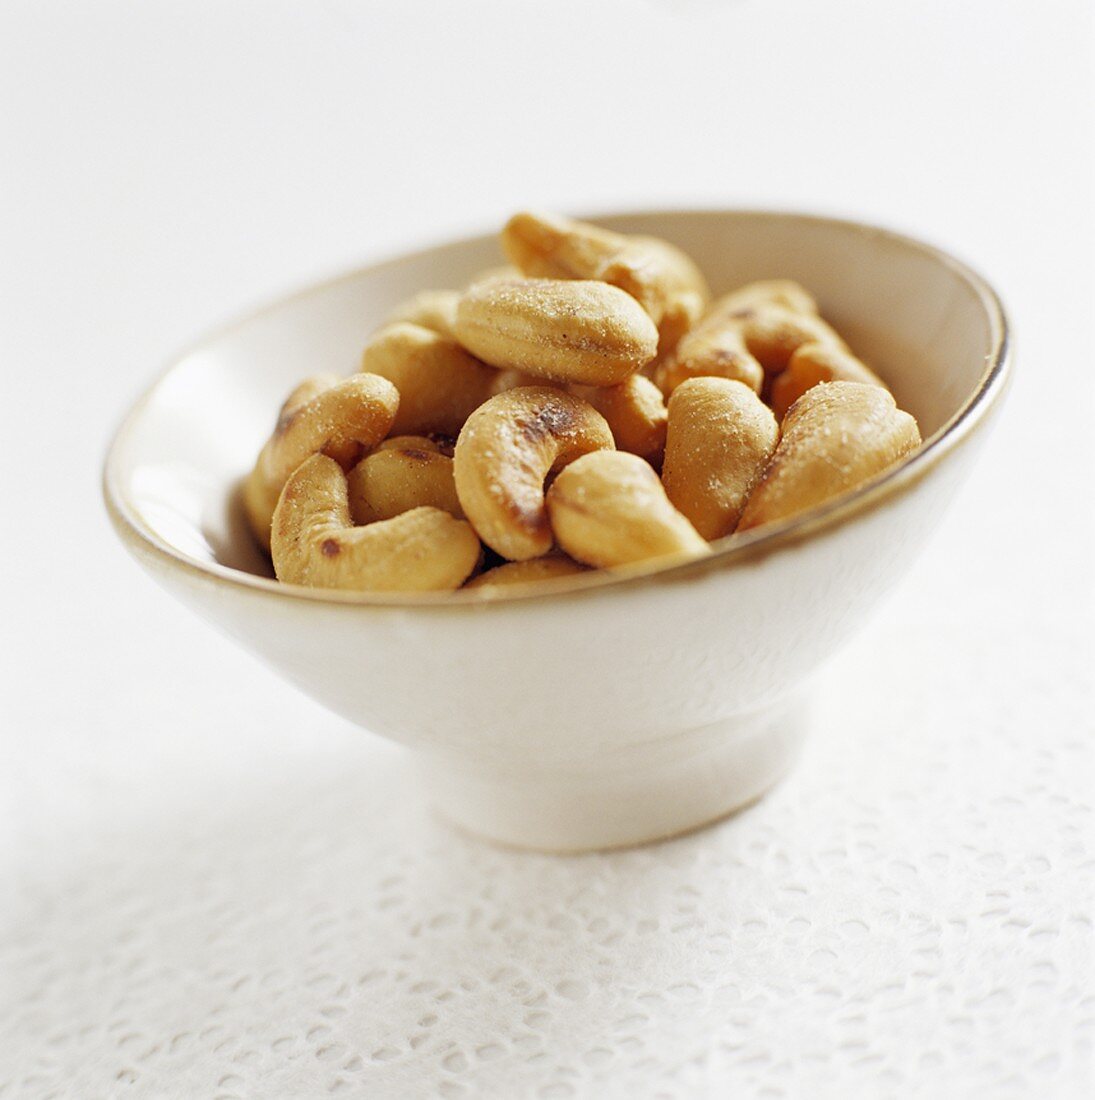 Shelled cashew nuts in ceramic bowl